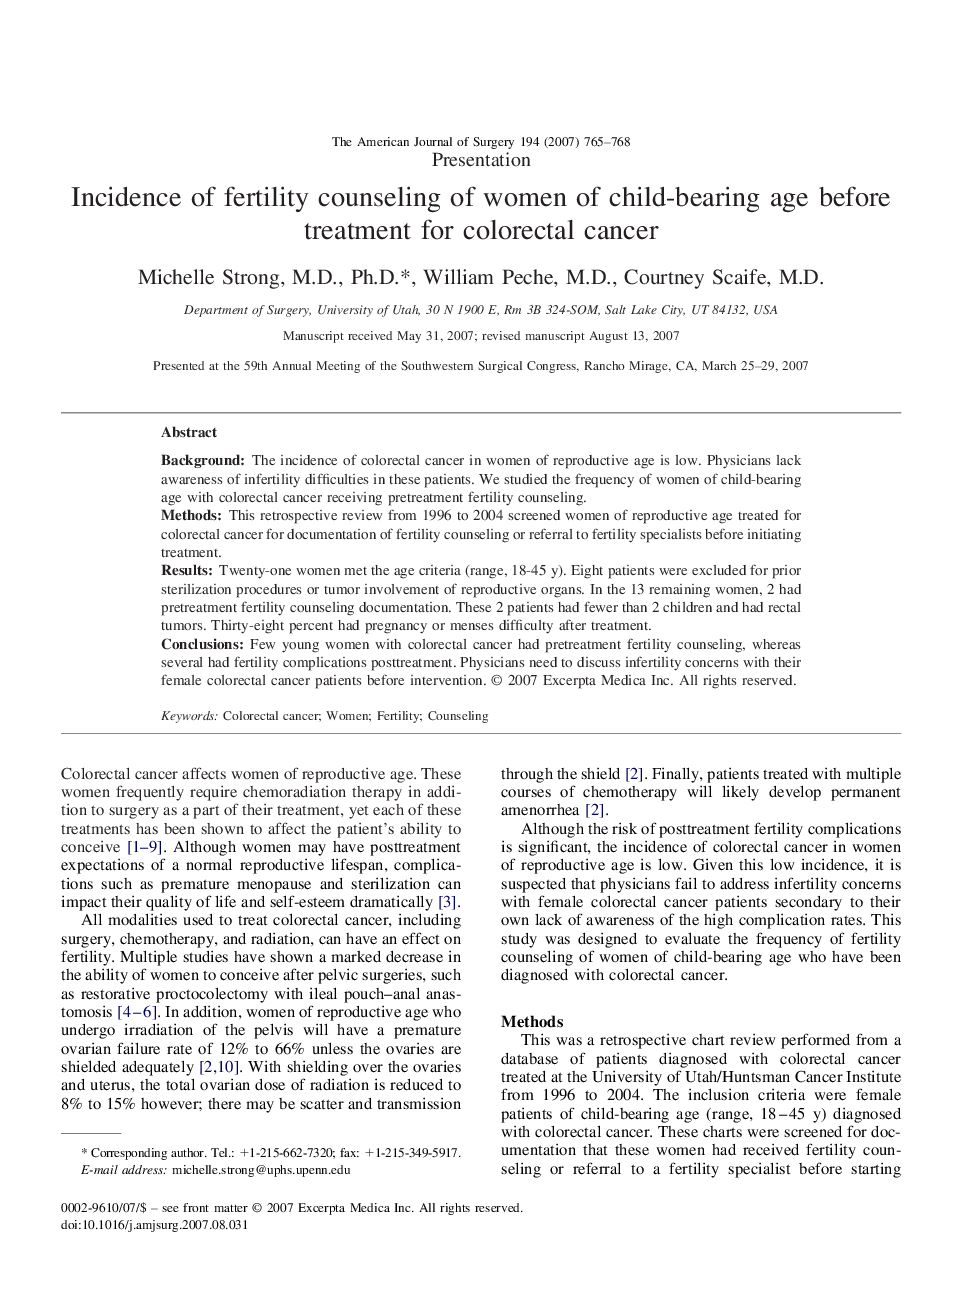 Incidence of fertility counseling of women of child-bearing age before treatment for colorectal cancer